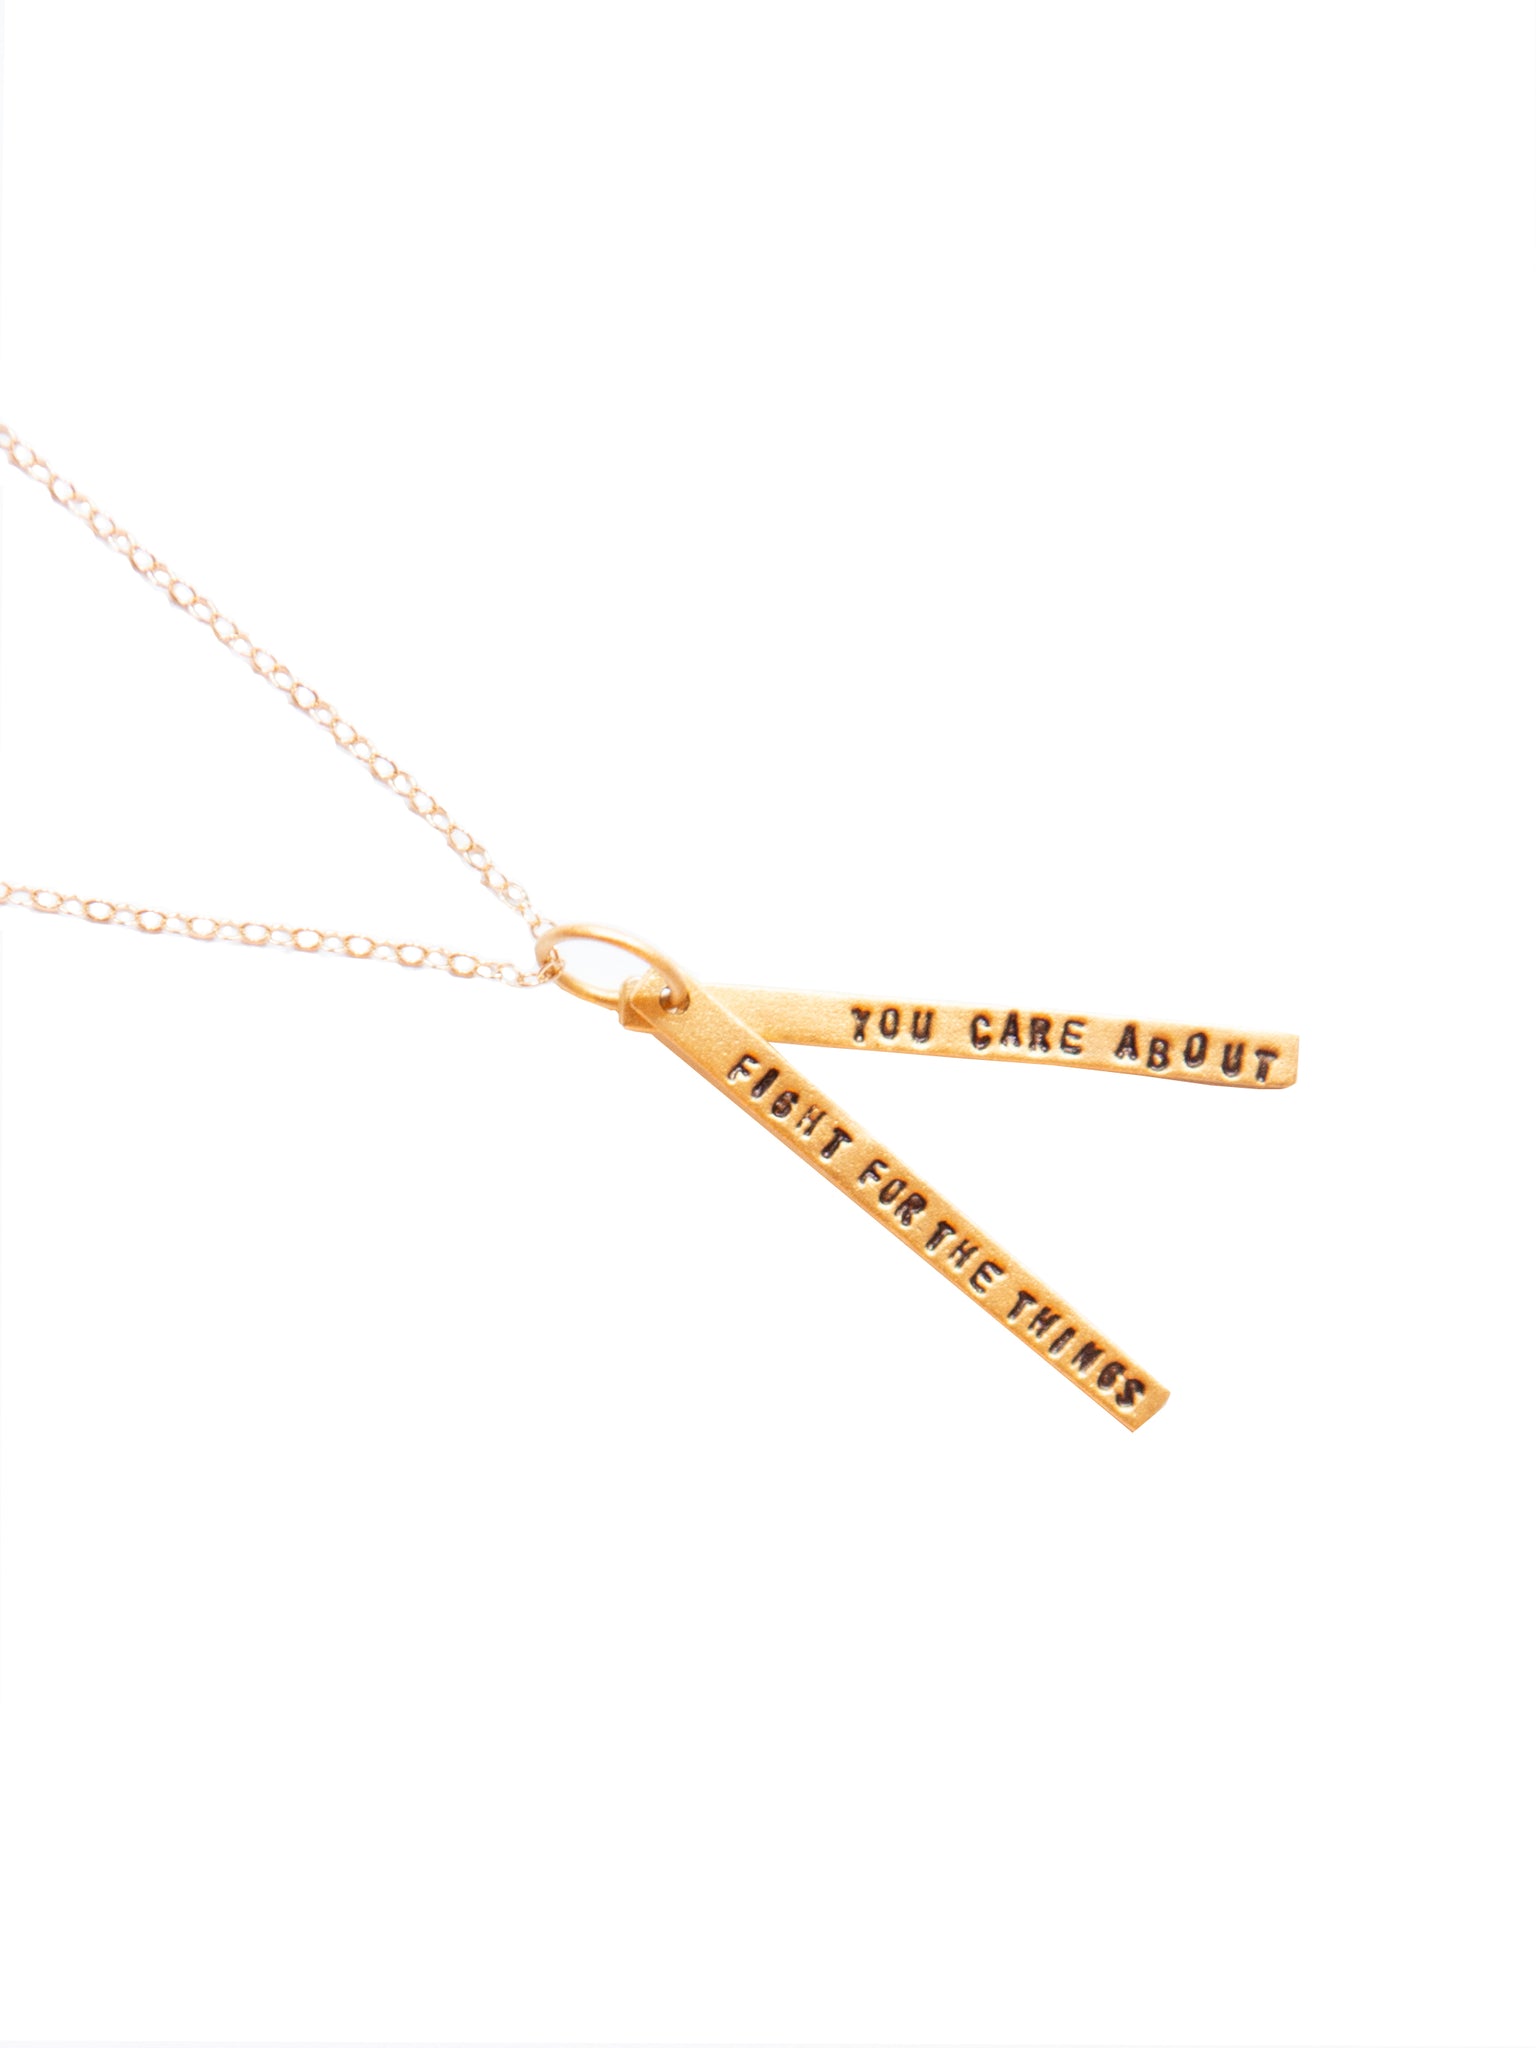 Chocolate & Steel Long-Bar Quote Necklace Ruth Bader Ginsburg Gold Weston Table